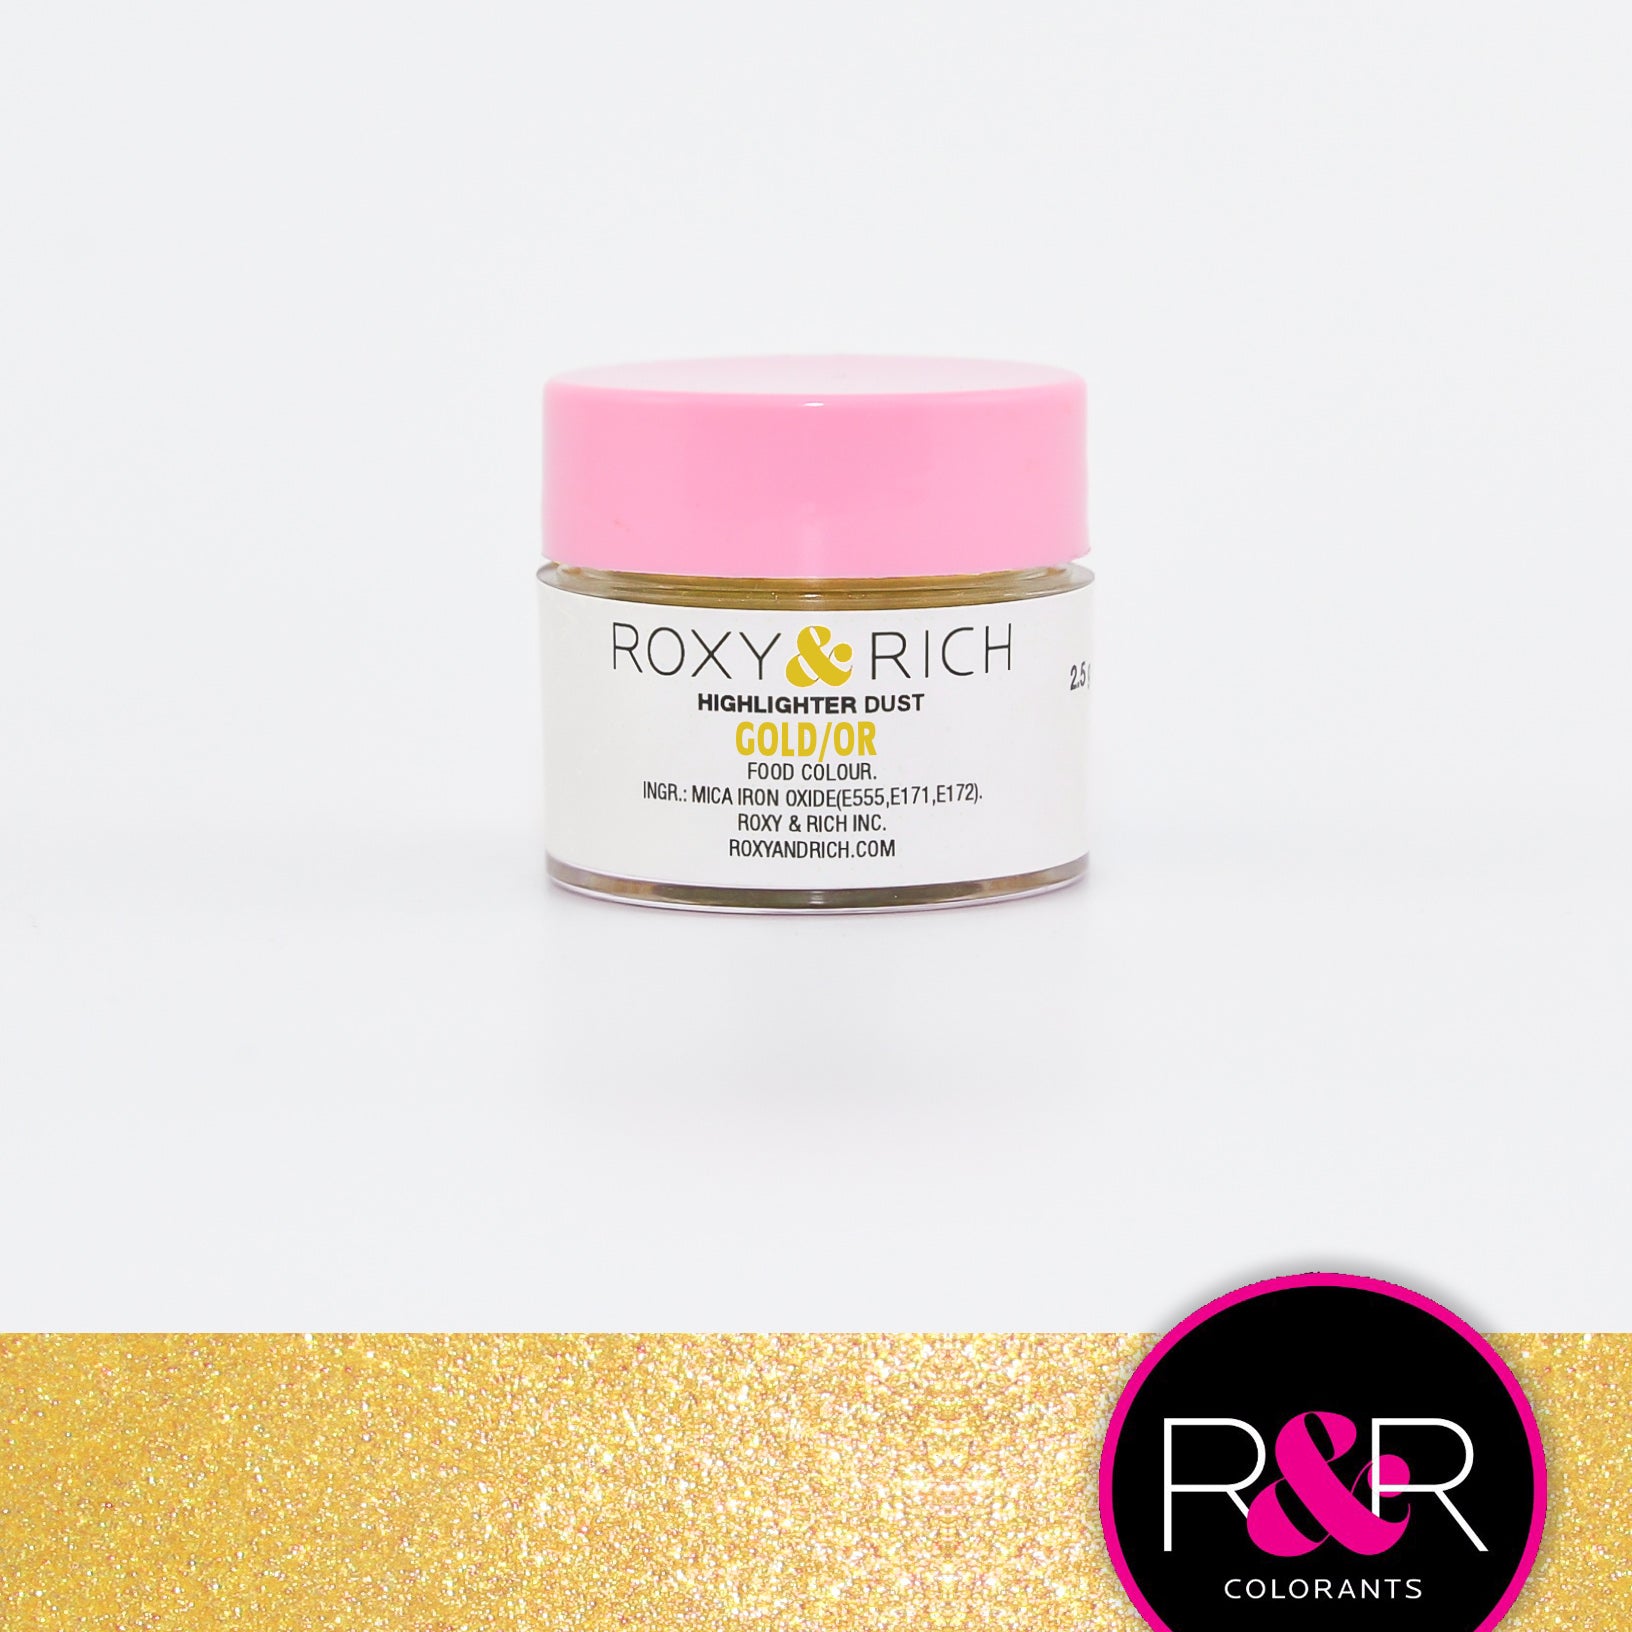 Poudre Highlighter couleur Or    - Roxy & Rich - Poudre Highlighter - 